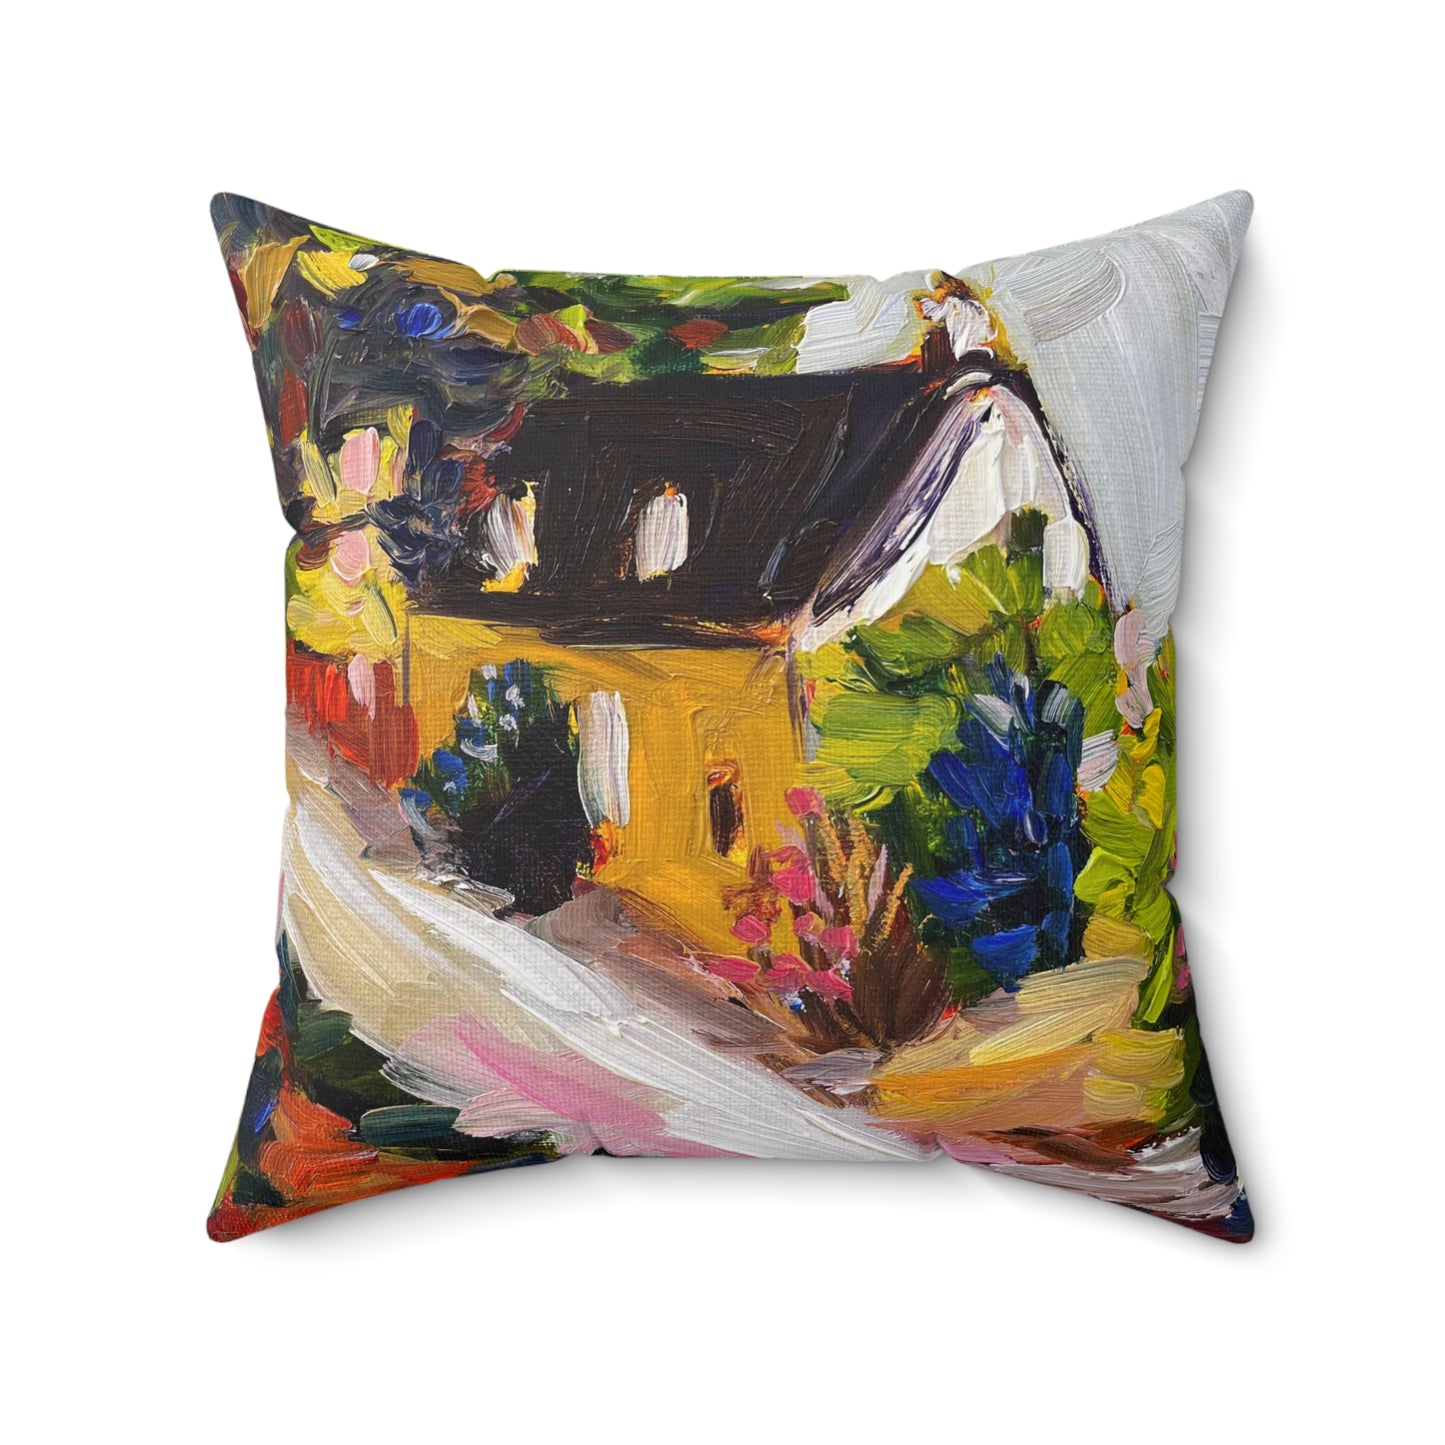 Thatched Cottage Snowshill Cotswolds  Indoor Spun Polyester Square Pillow